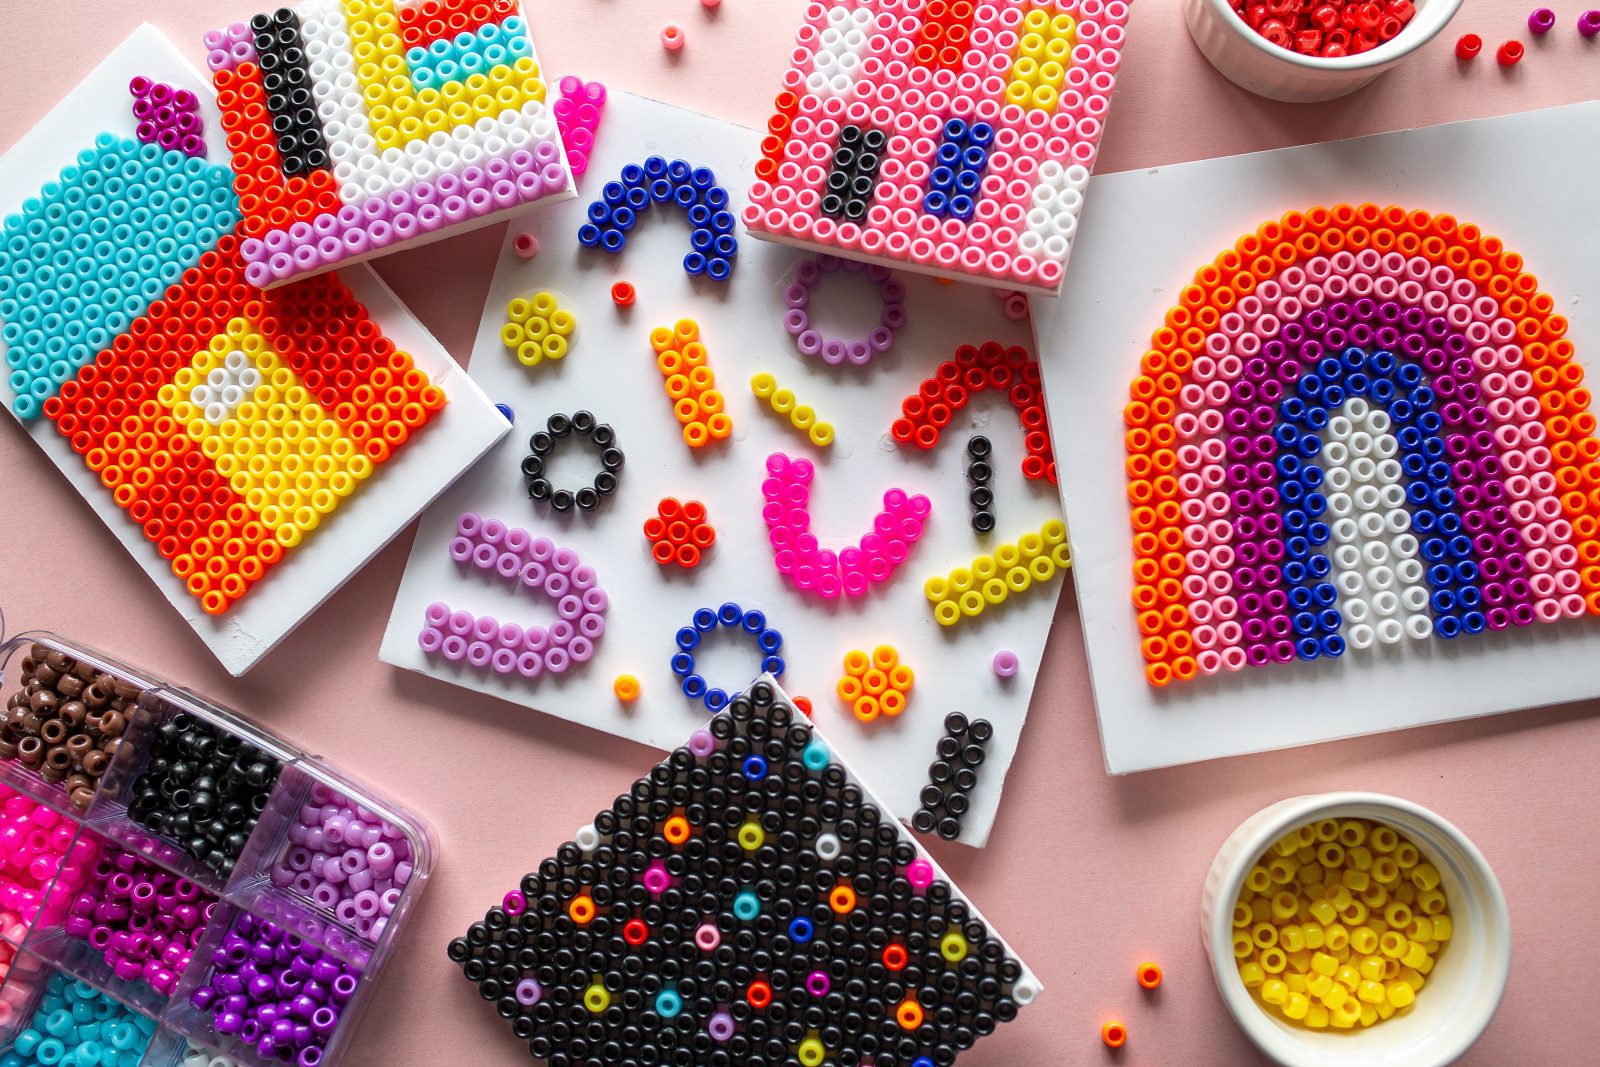 Kids Craft: How to Make a Bead Mosaic + a tutorial featured by Top US Craft Blog + The Pretty Life Girls